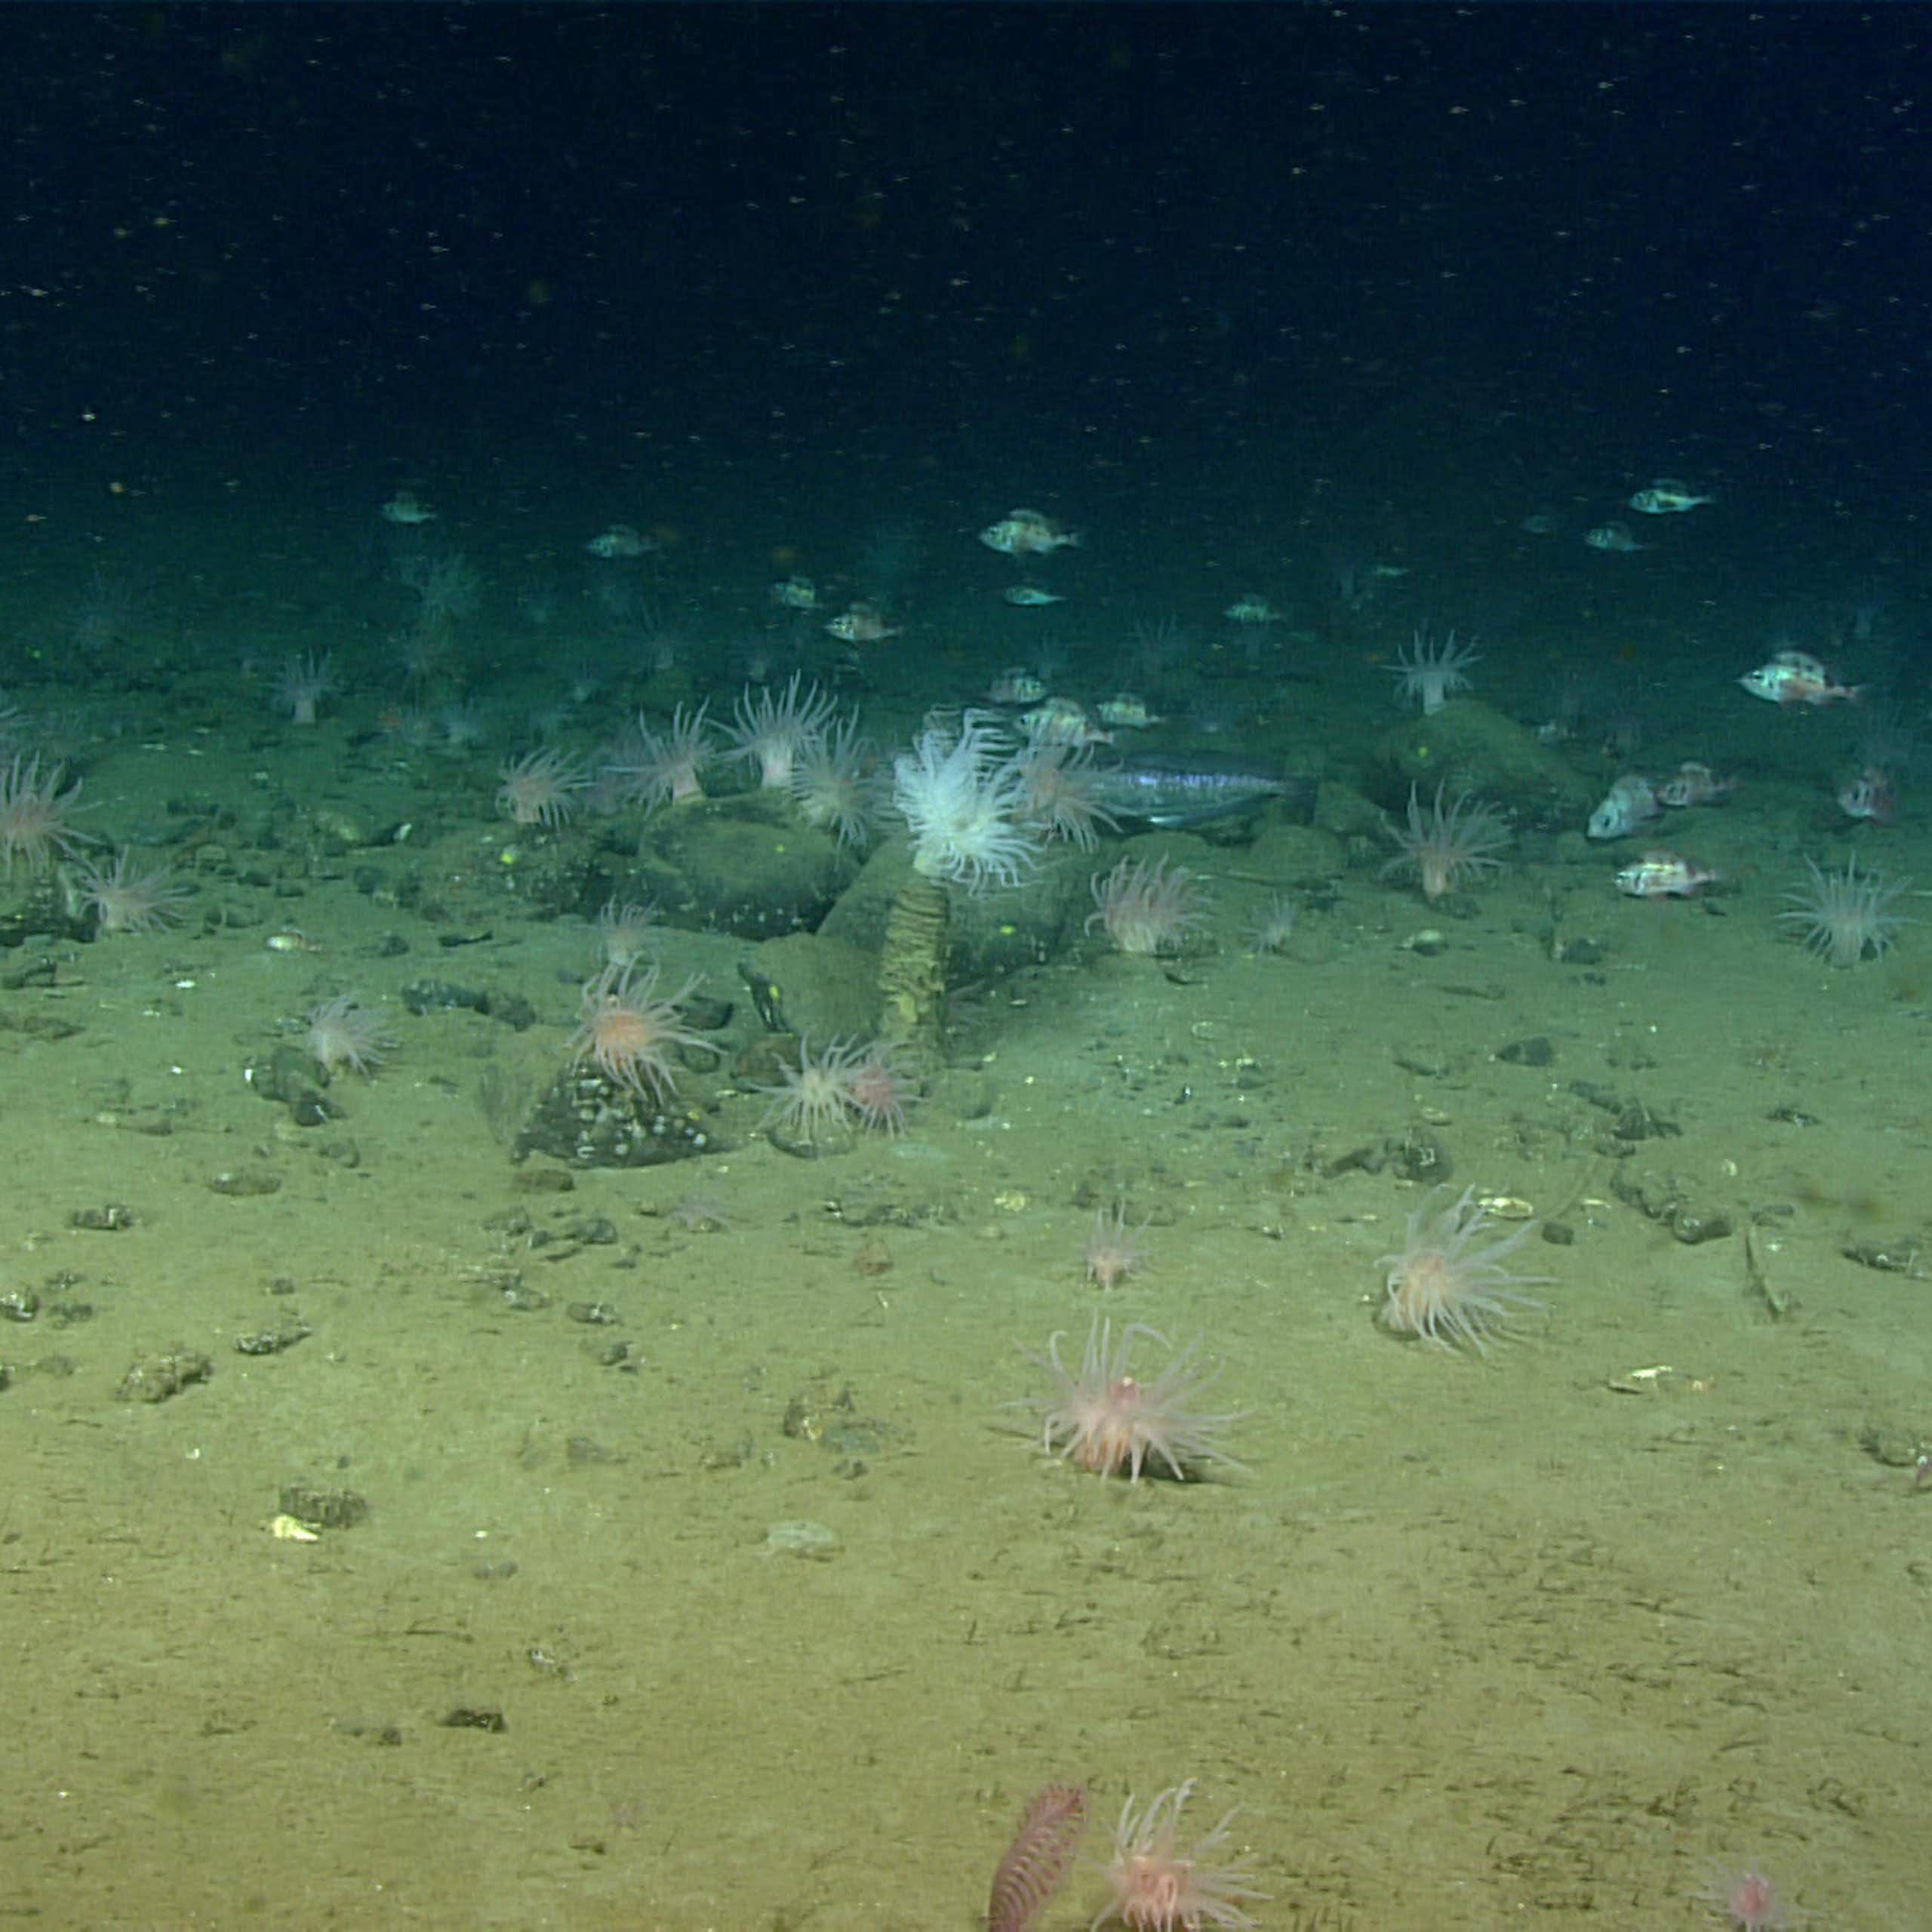 An image of the seabed.